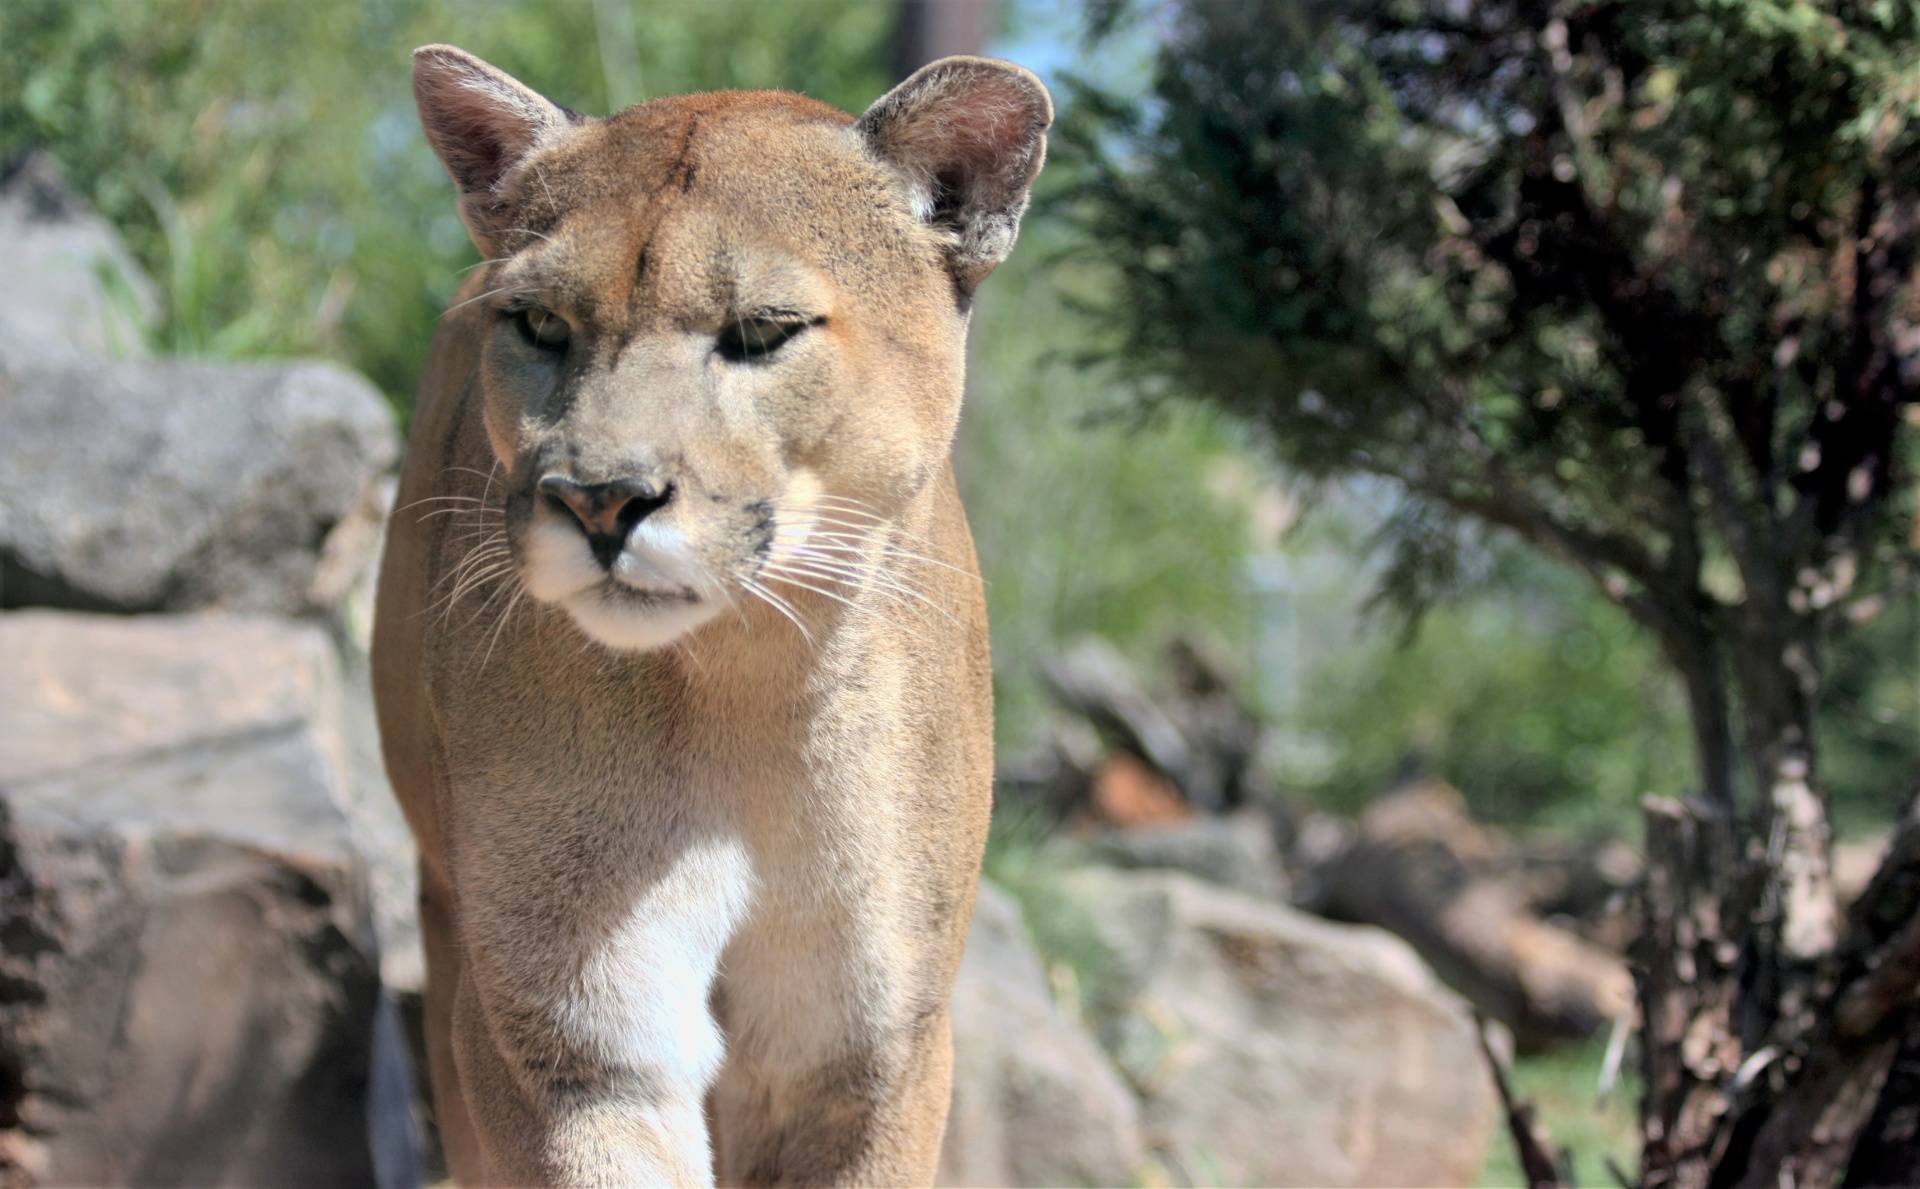 It is extremely unusual for cougars to attack humans, say officials, as they are shy animals that usually hunt smaller animals like deer, rabbits and goats.